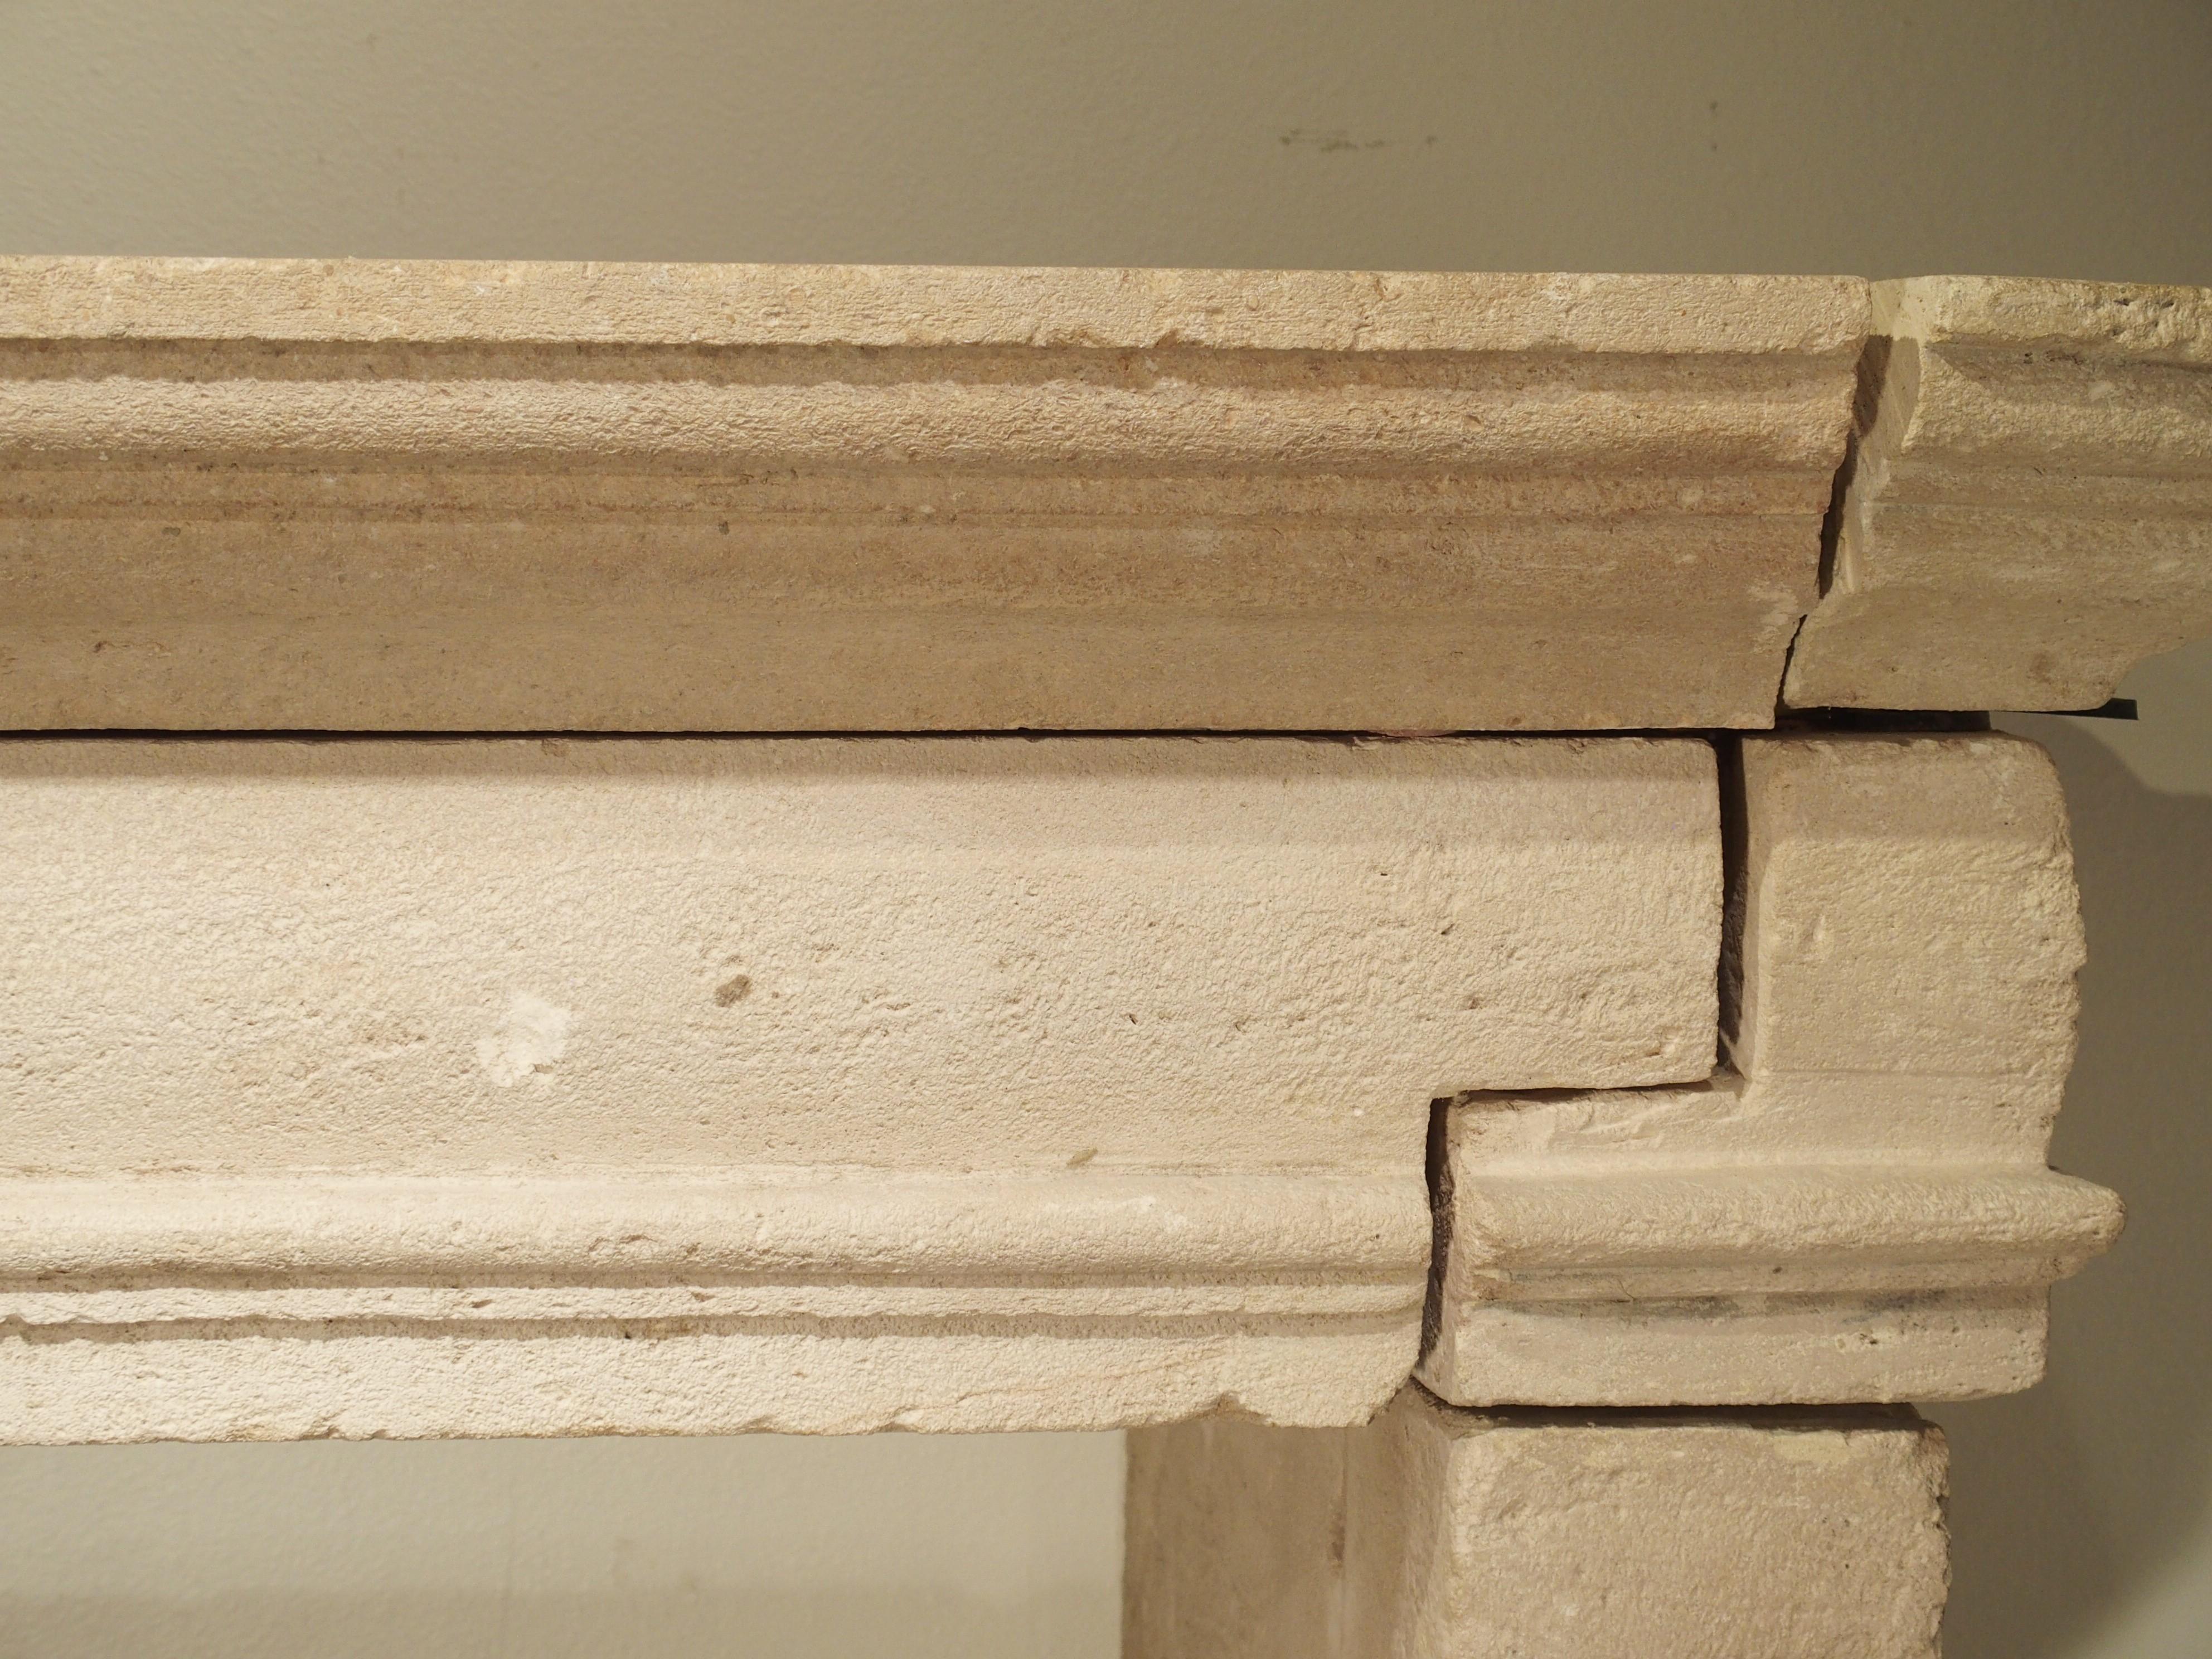 This elegant antique French carved limestone mantel exhibits a simplistic yet important style that is characteristic of fireplaces in the early 1600s, the period was that of Louis XIII, when the country was entering an era of prosperity. It’s the